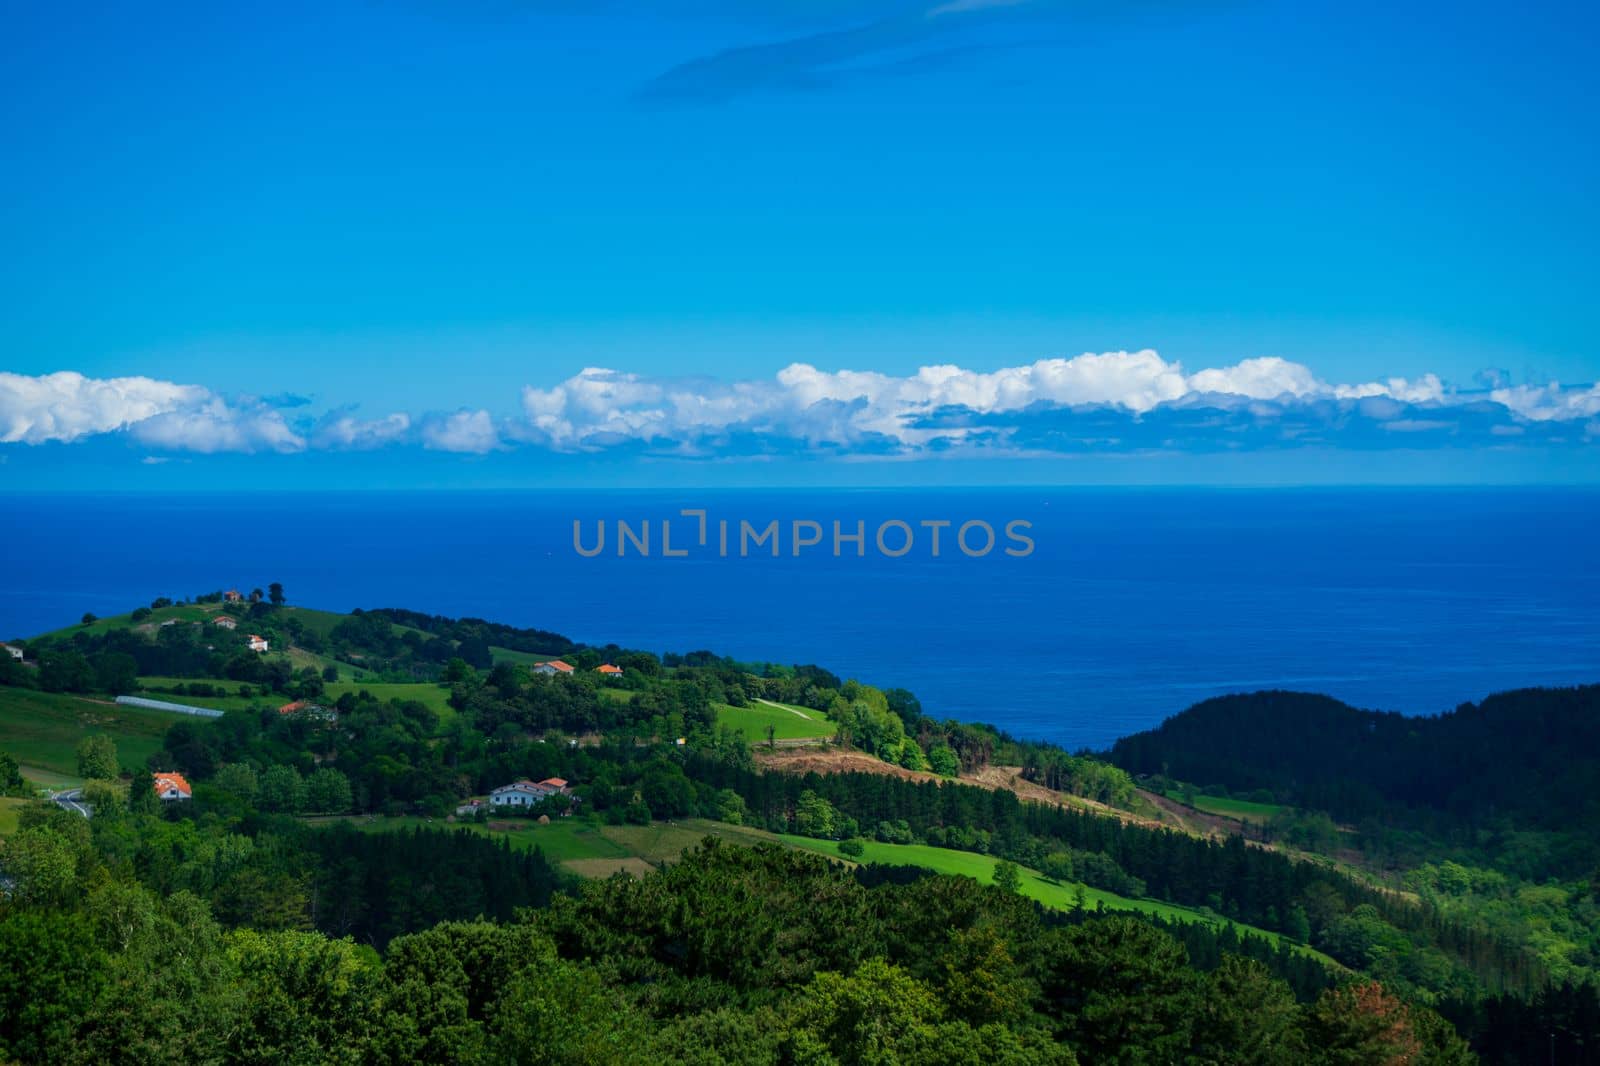 Landscape overlooking the green hills and the Atlantic Ocean. Coast of Basque Country, Spain by paca-waca